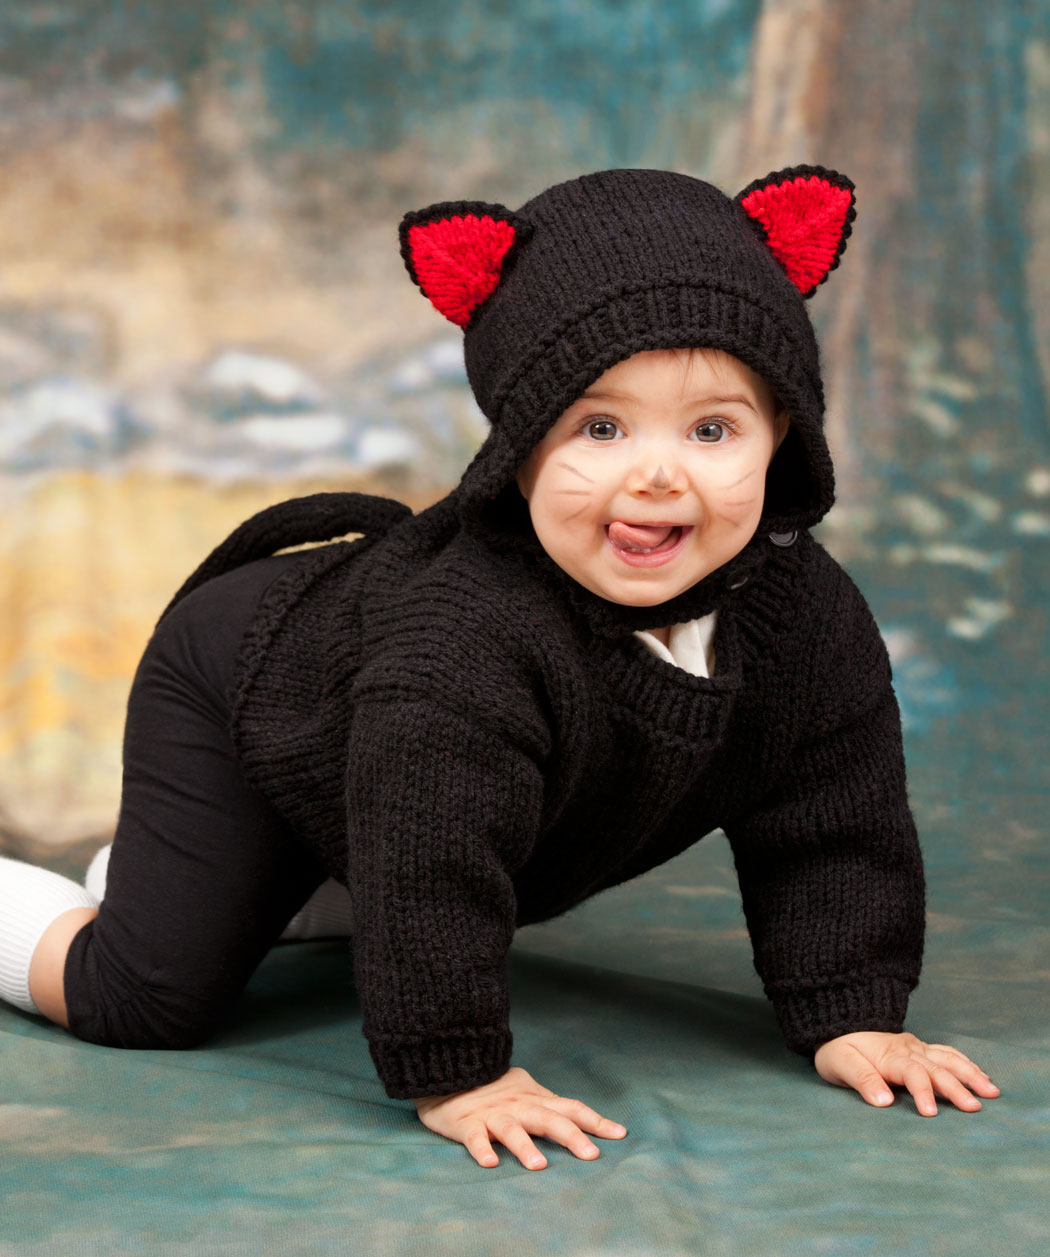 Baby Black Cat Knitting Hat Pattern Images